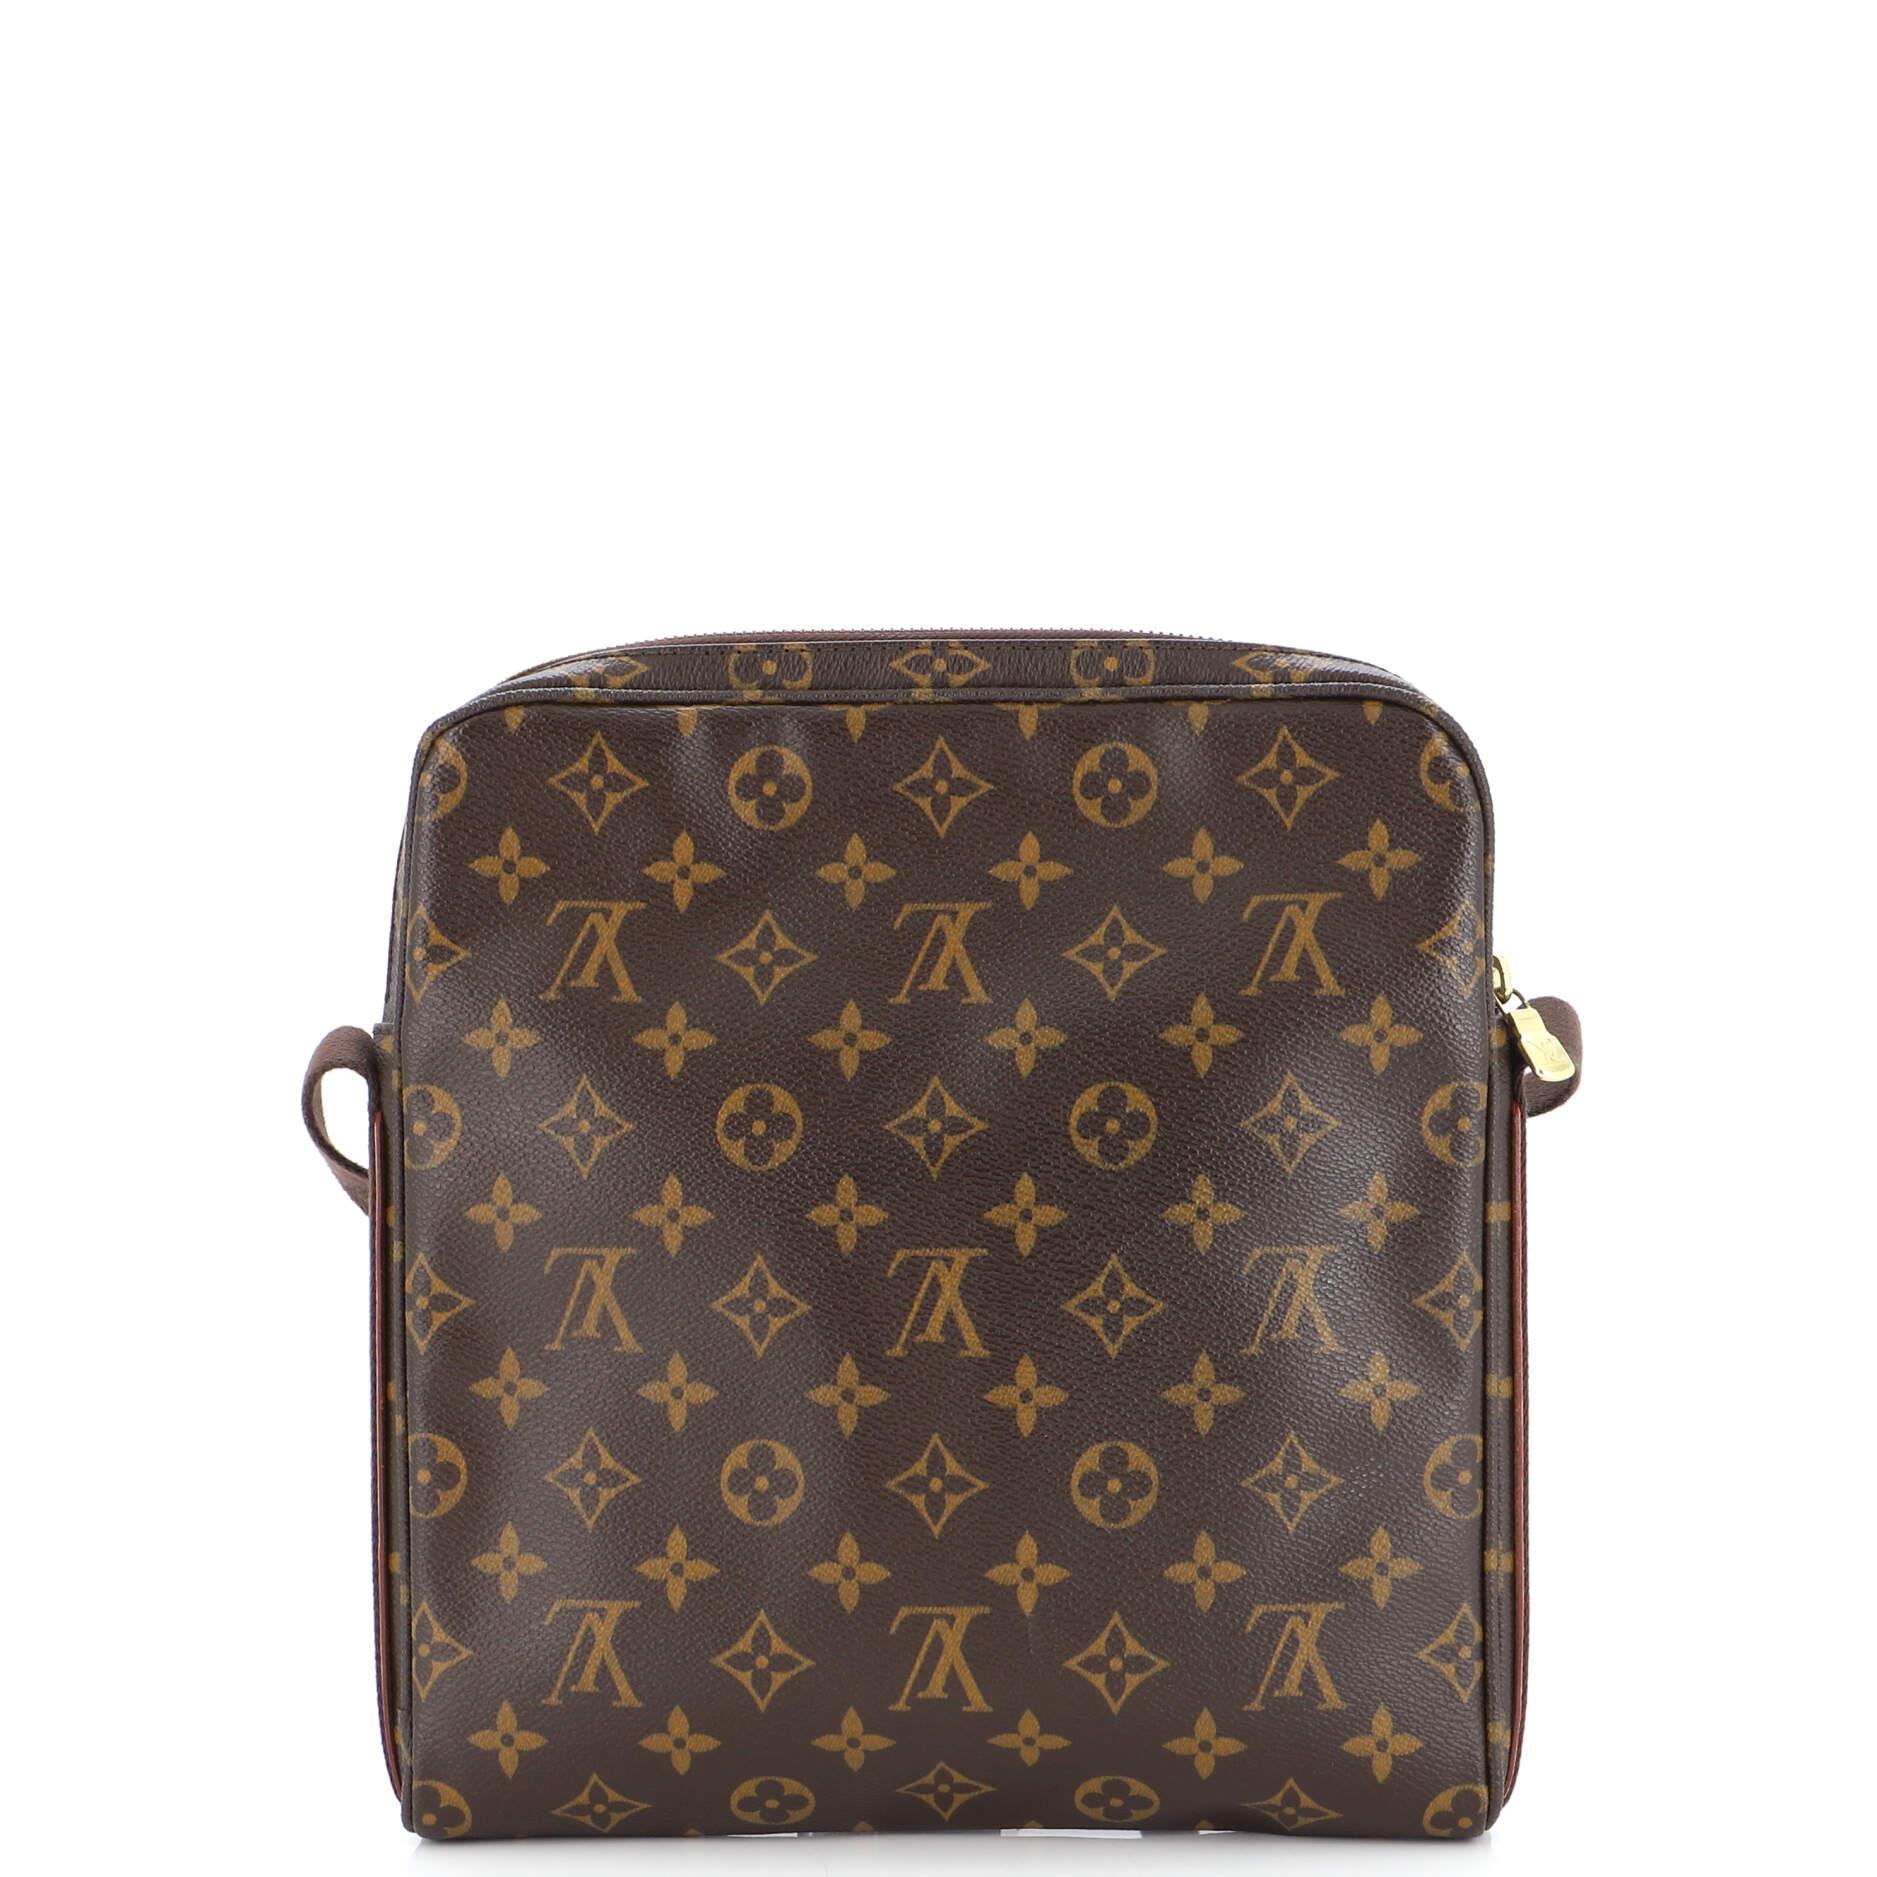 Louis Vuitton Trotteur Beaubourg Handbag Monogram Canvas In Good Condition For Sale In NY, NY